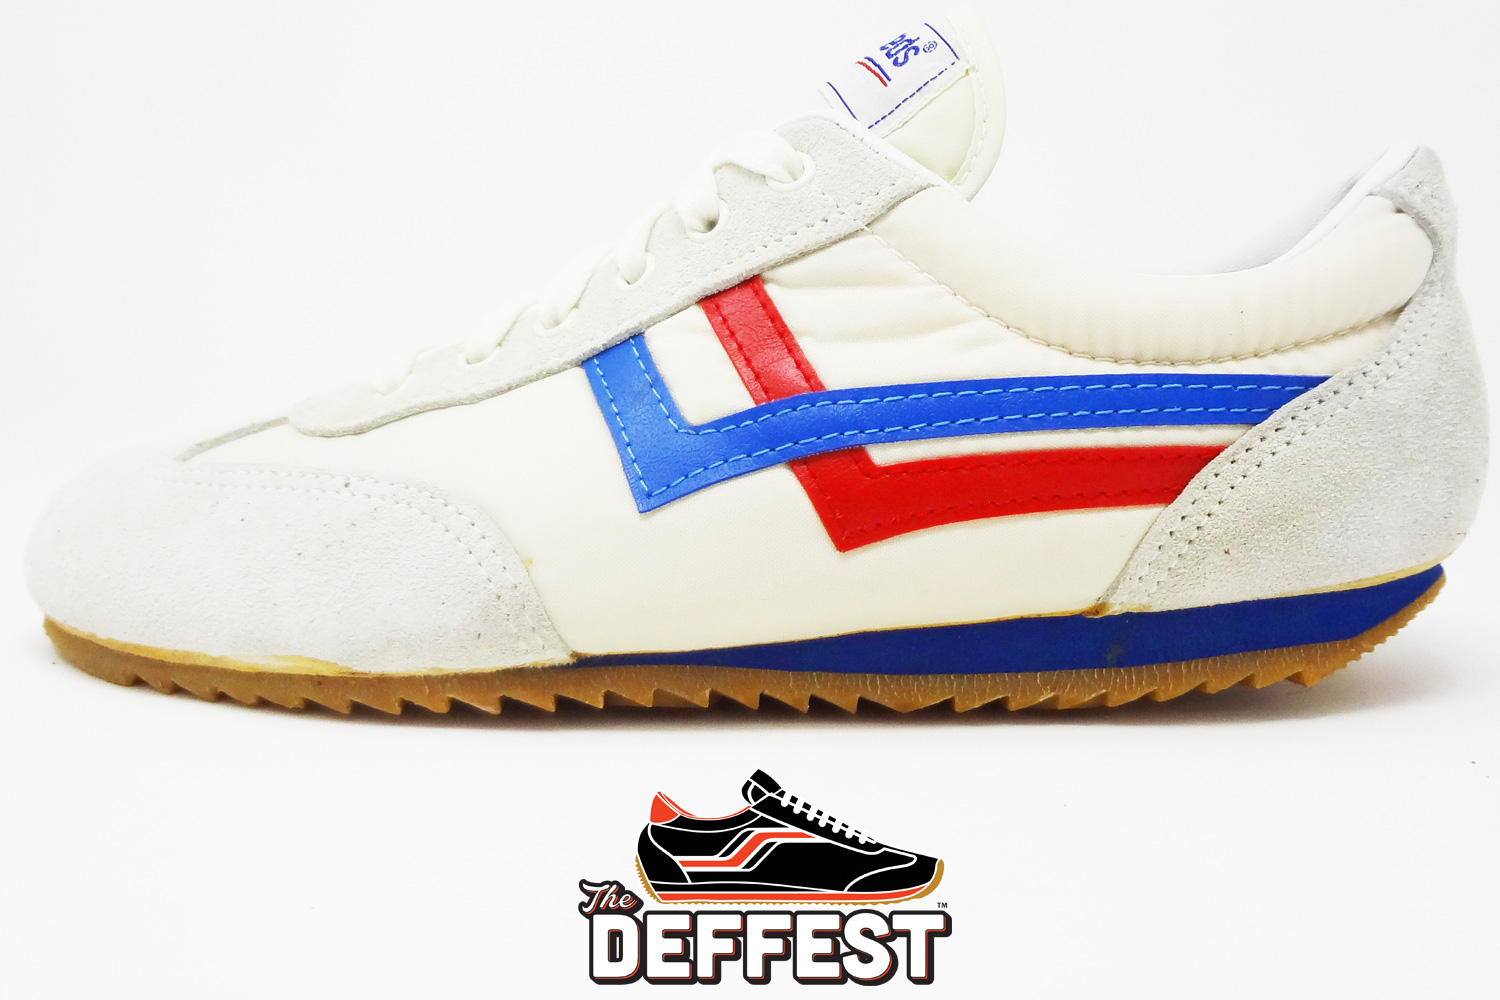 Vintage late 70s early 80s Pro-Keds sneakers @ The Deffest